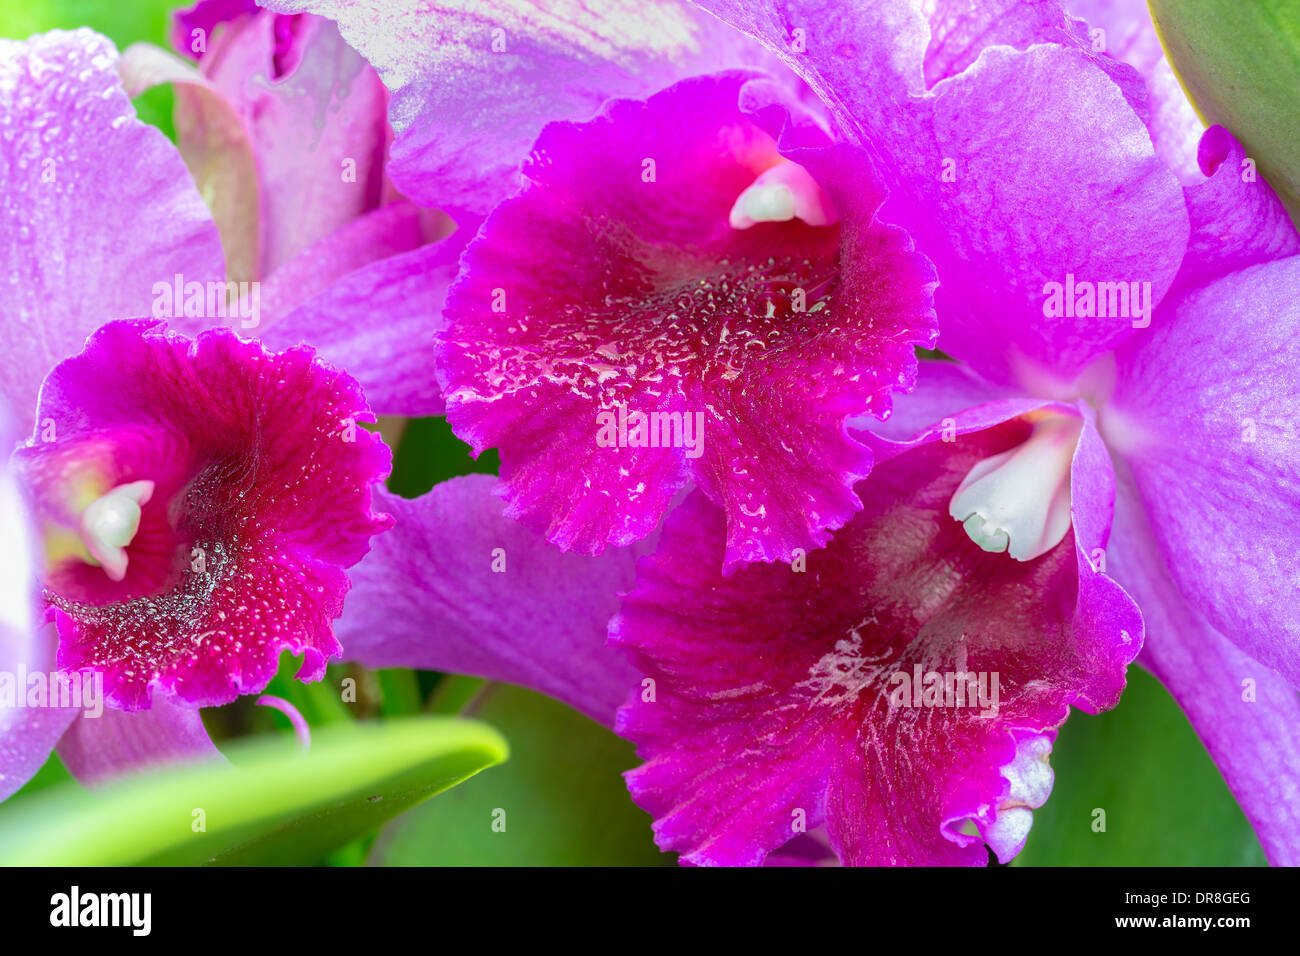 A cluster of purple and white cattleya orchids on the vine Stock Photo